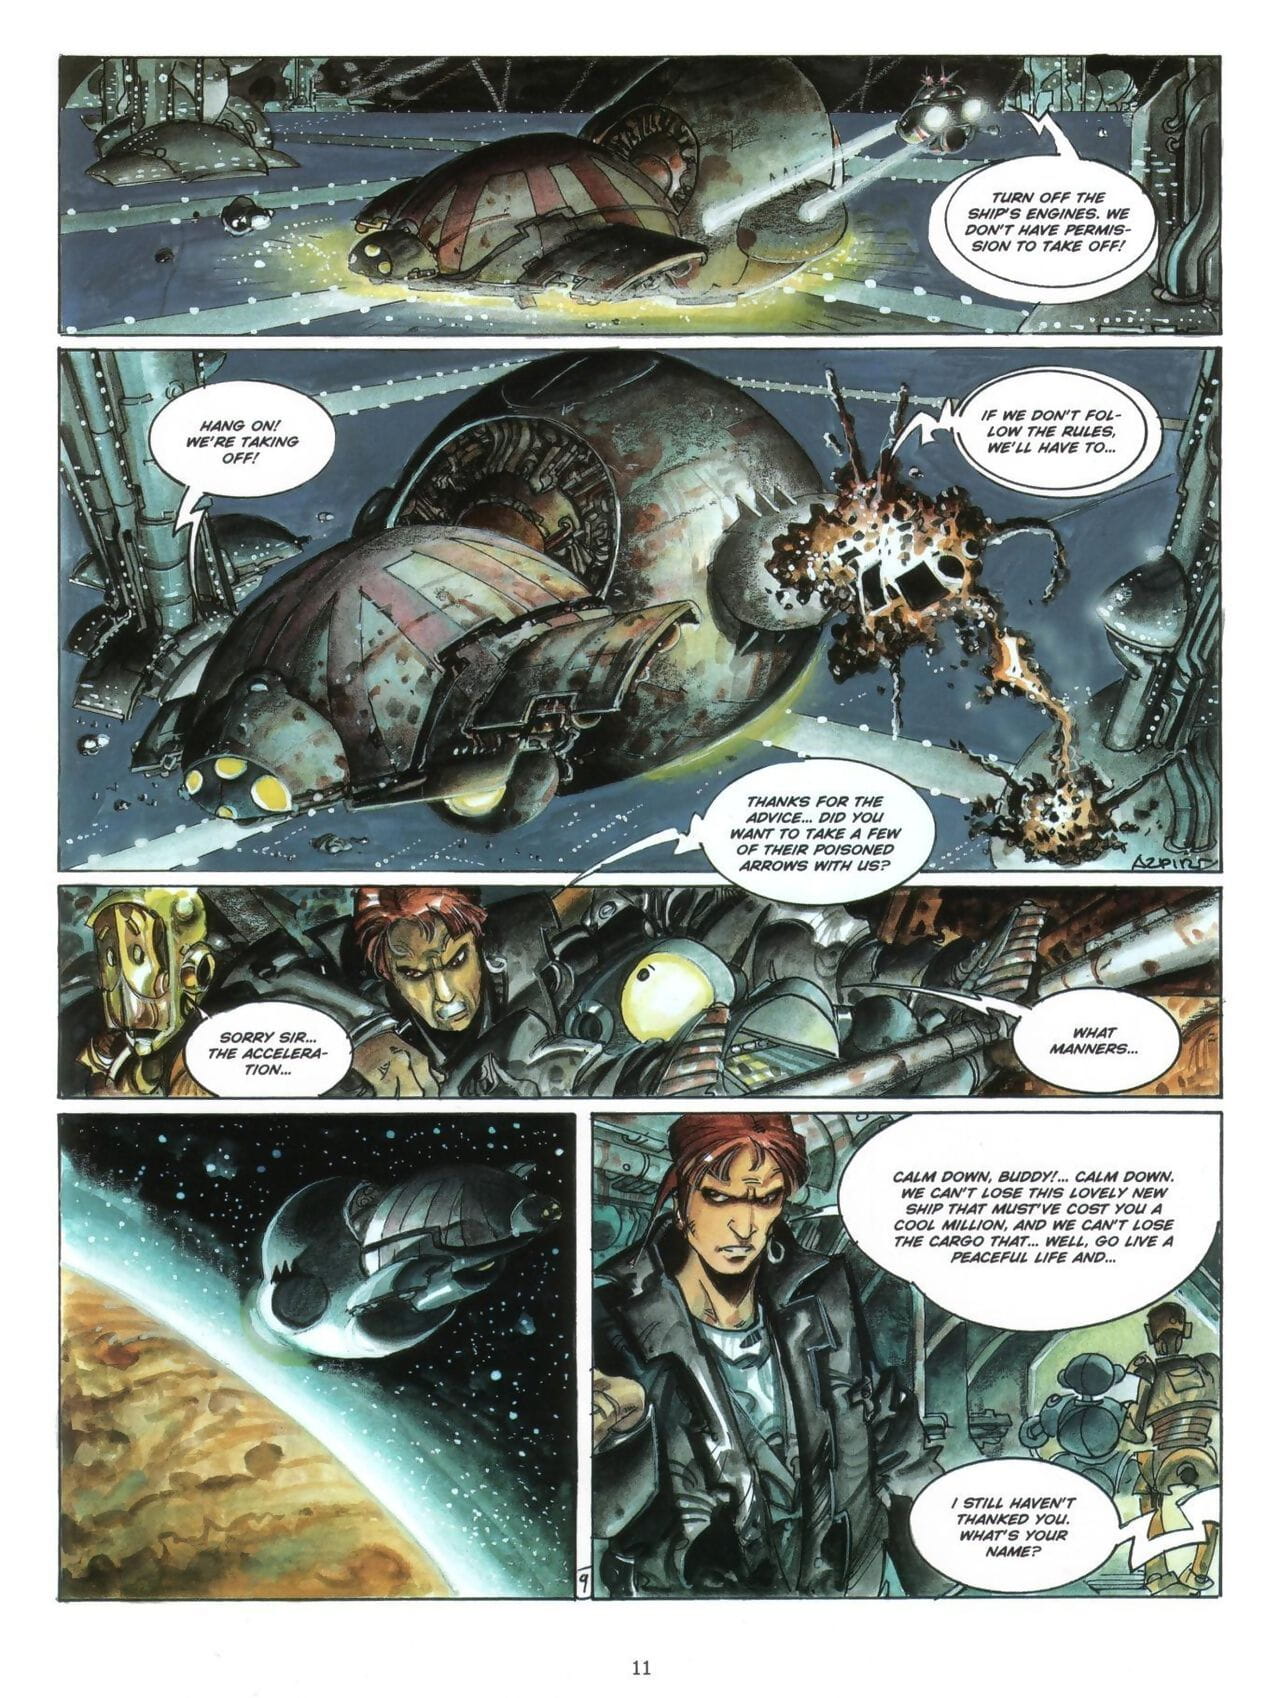 The Eye of Dart-An-Gor page 1